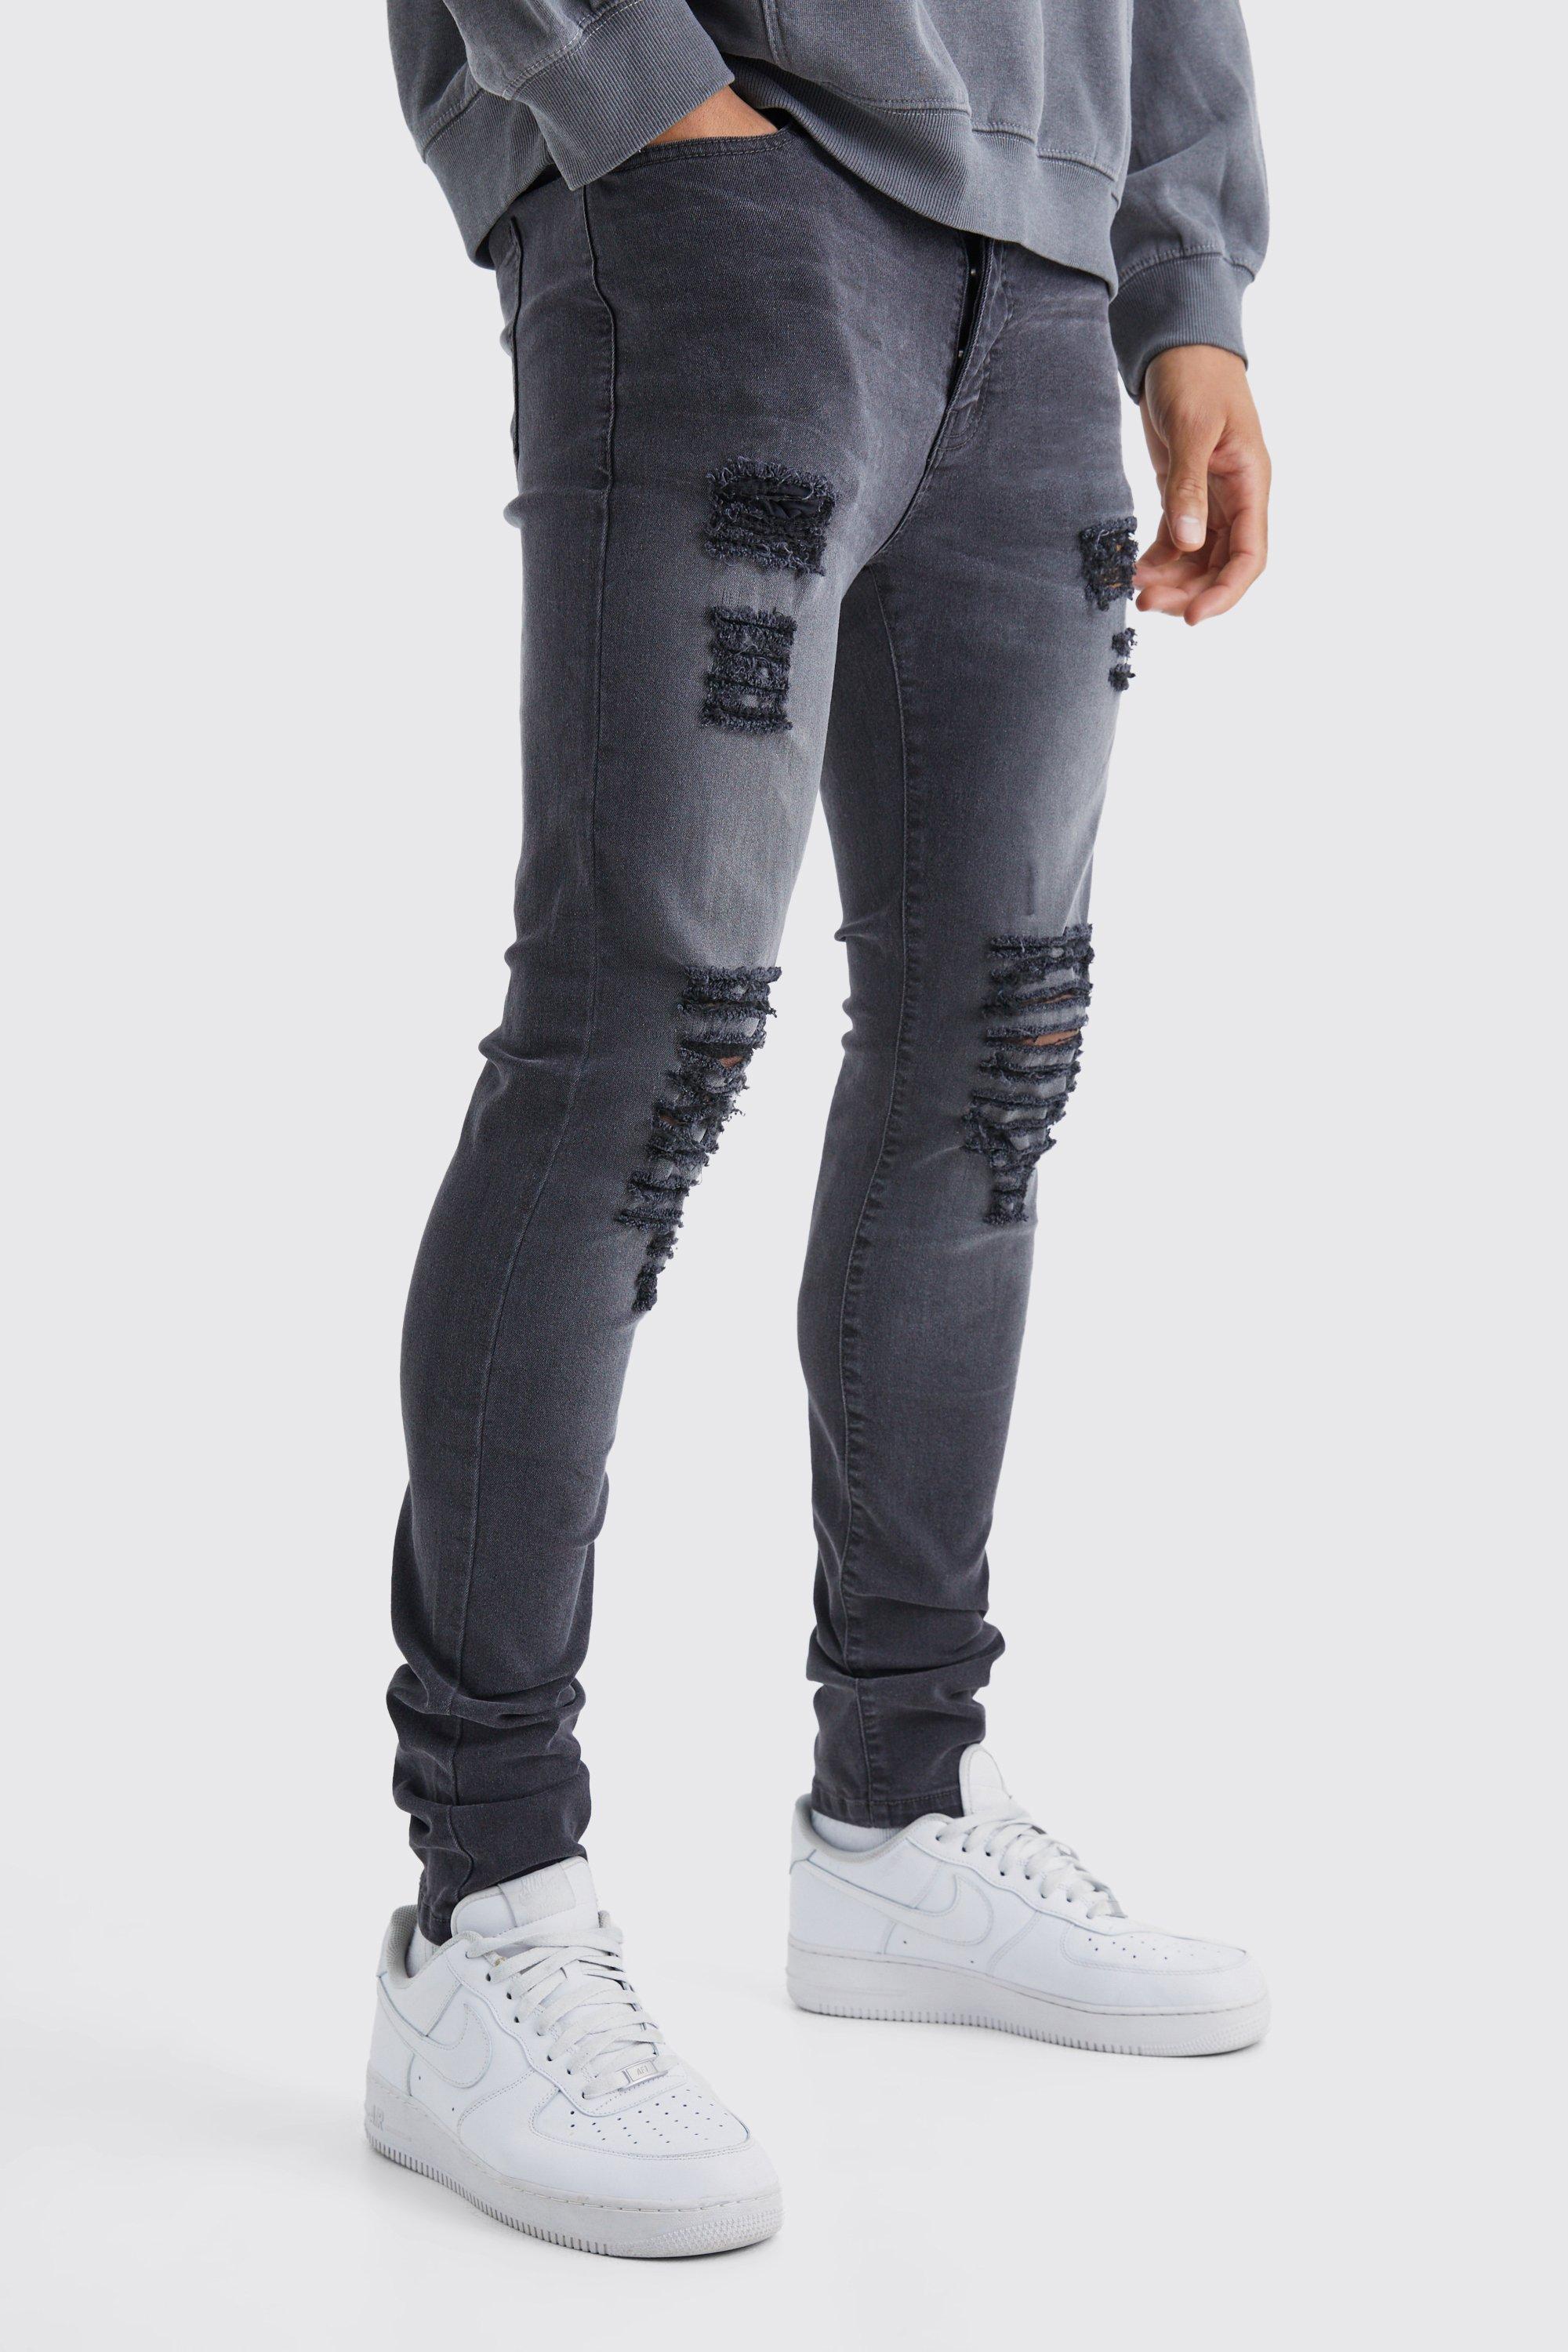 Mens Grey Tall Skinny Jeans With All Over Rips, Grey